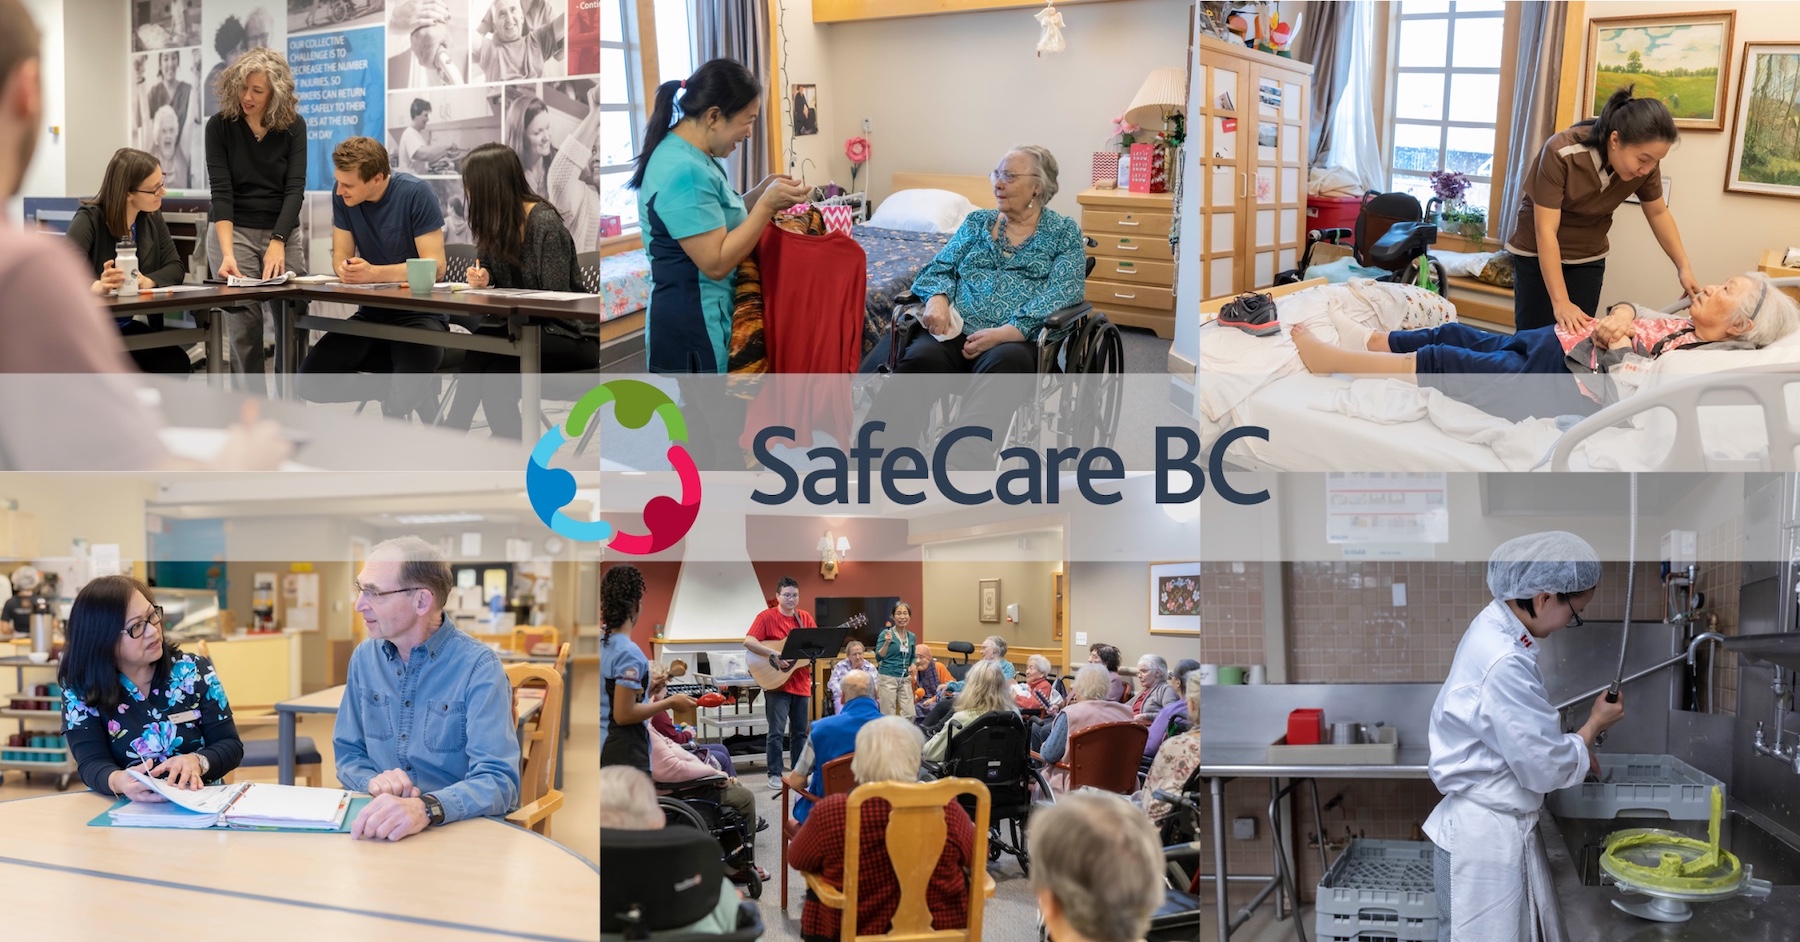 Latest updates from SafeCare BC